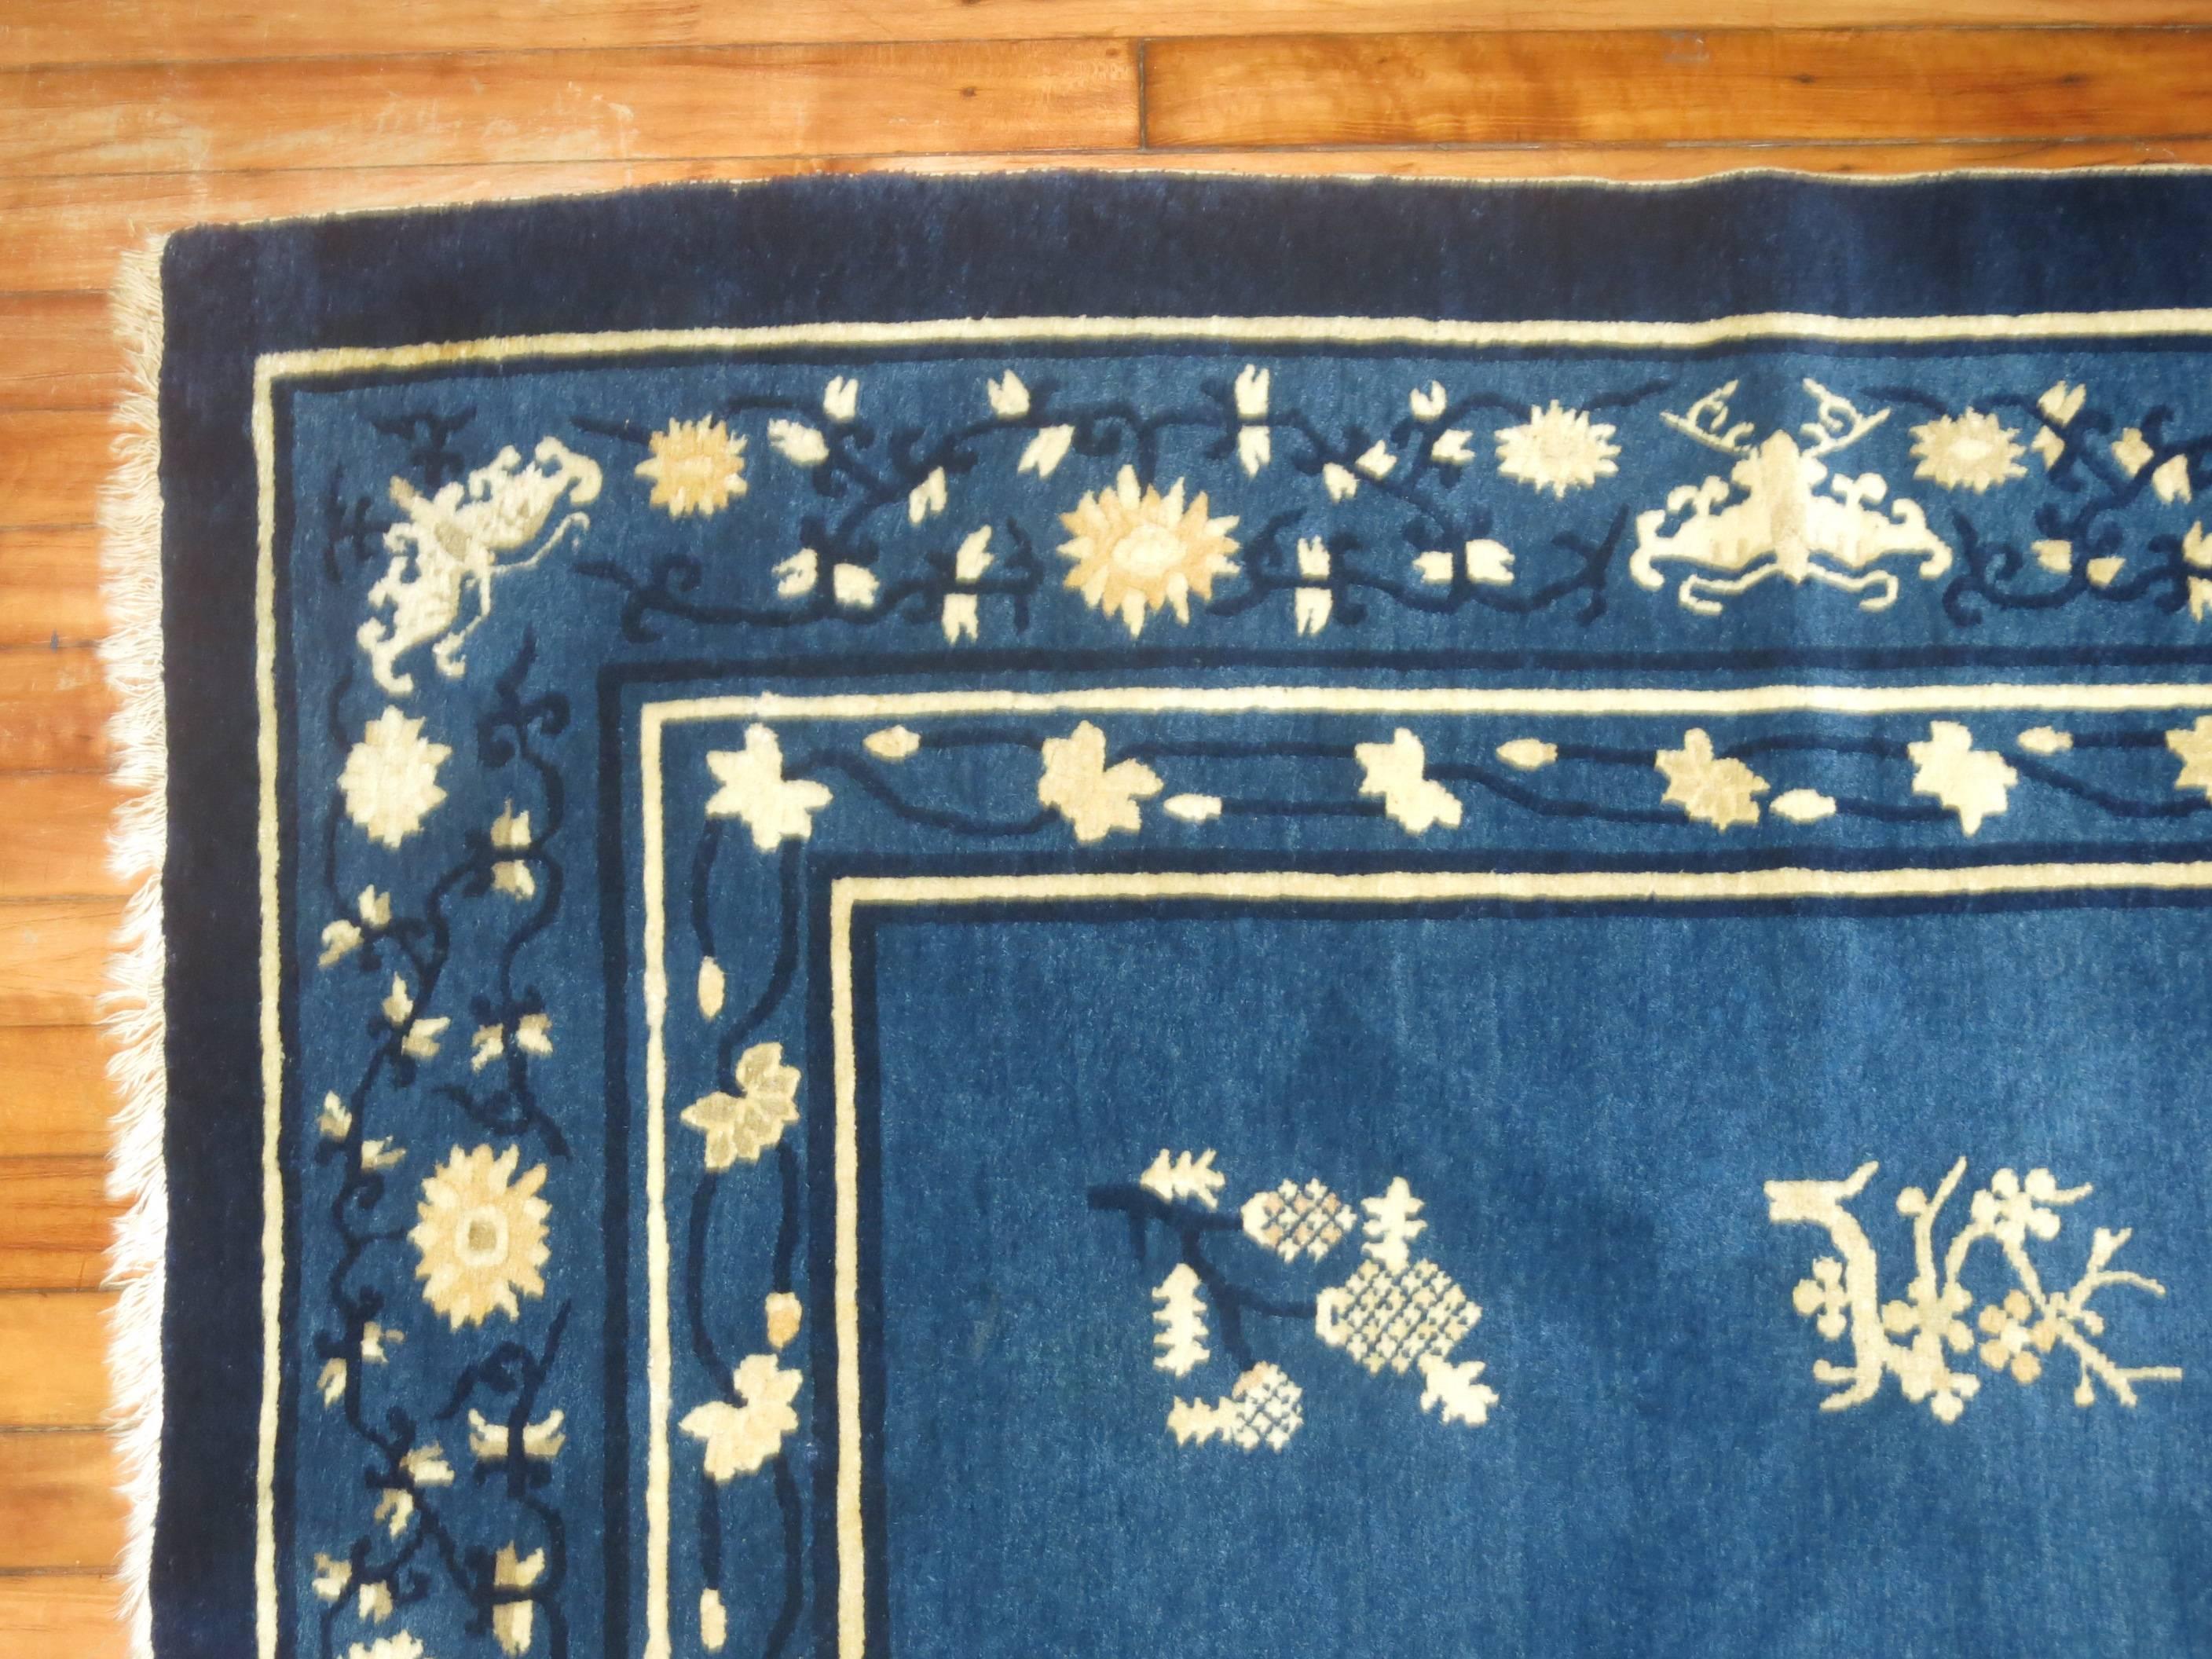 Gorgeous Chinese Peking carpet with a floral motif on a blue ground and multiple border design. Even more attractive once seen in person.